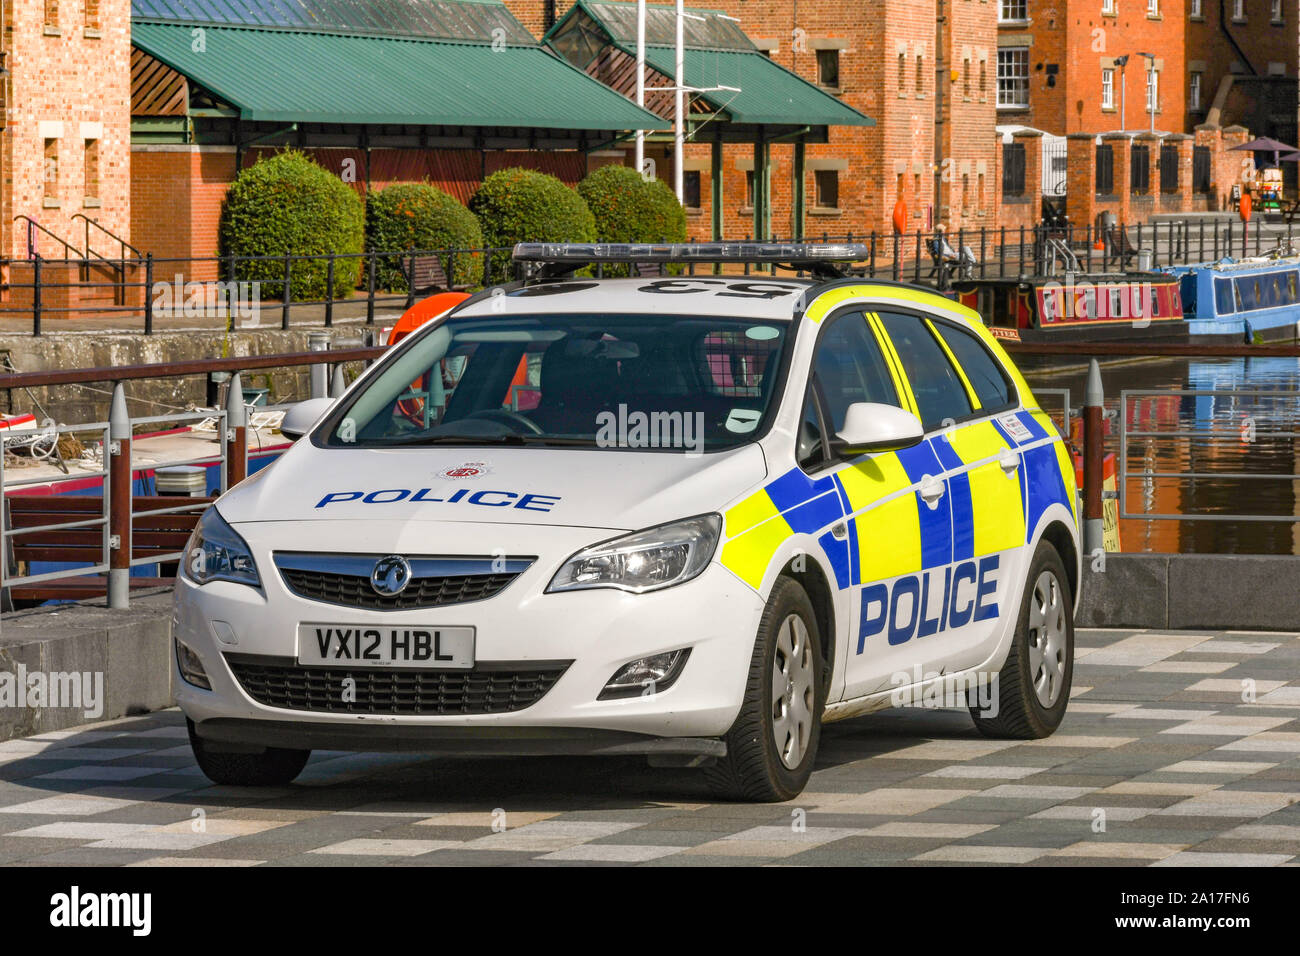 GLOCESTER, ENGLAND - SEPTEMBER 2019: Police patrol car parked in Gloucester Quays, which is the former docks area Stock Photo